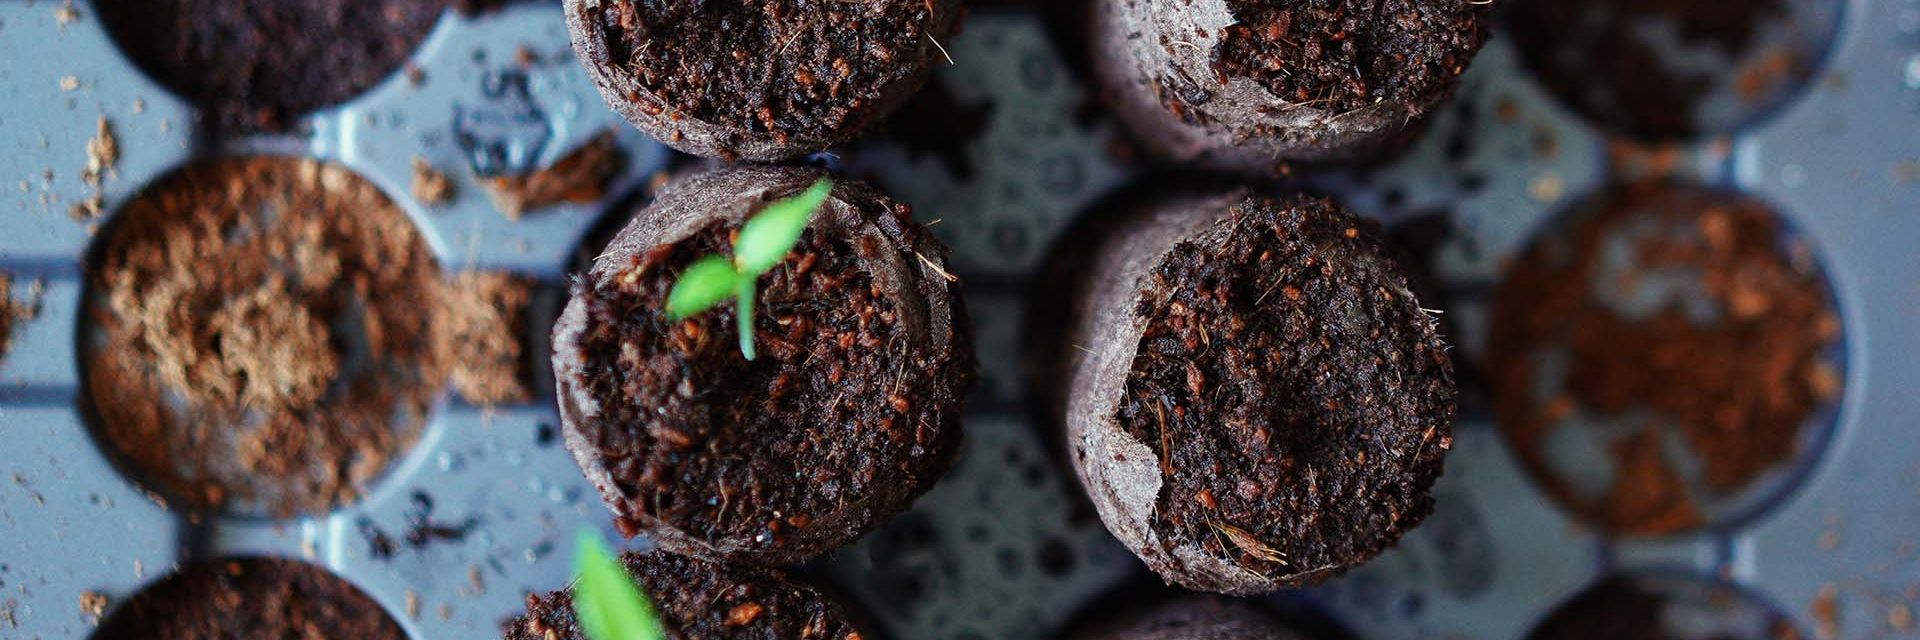 How-to-sow-seeds-for-vegetables